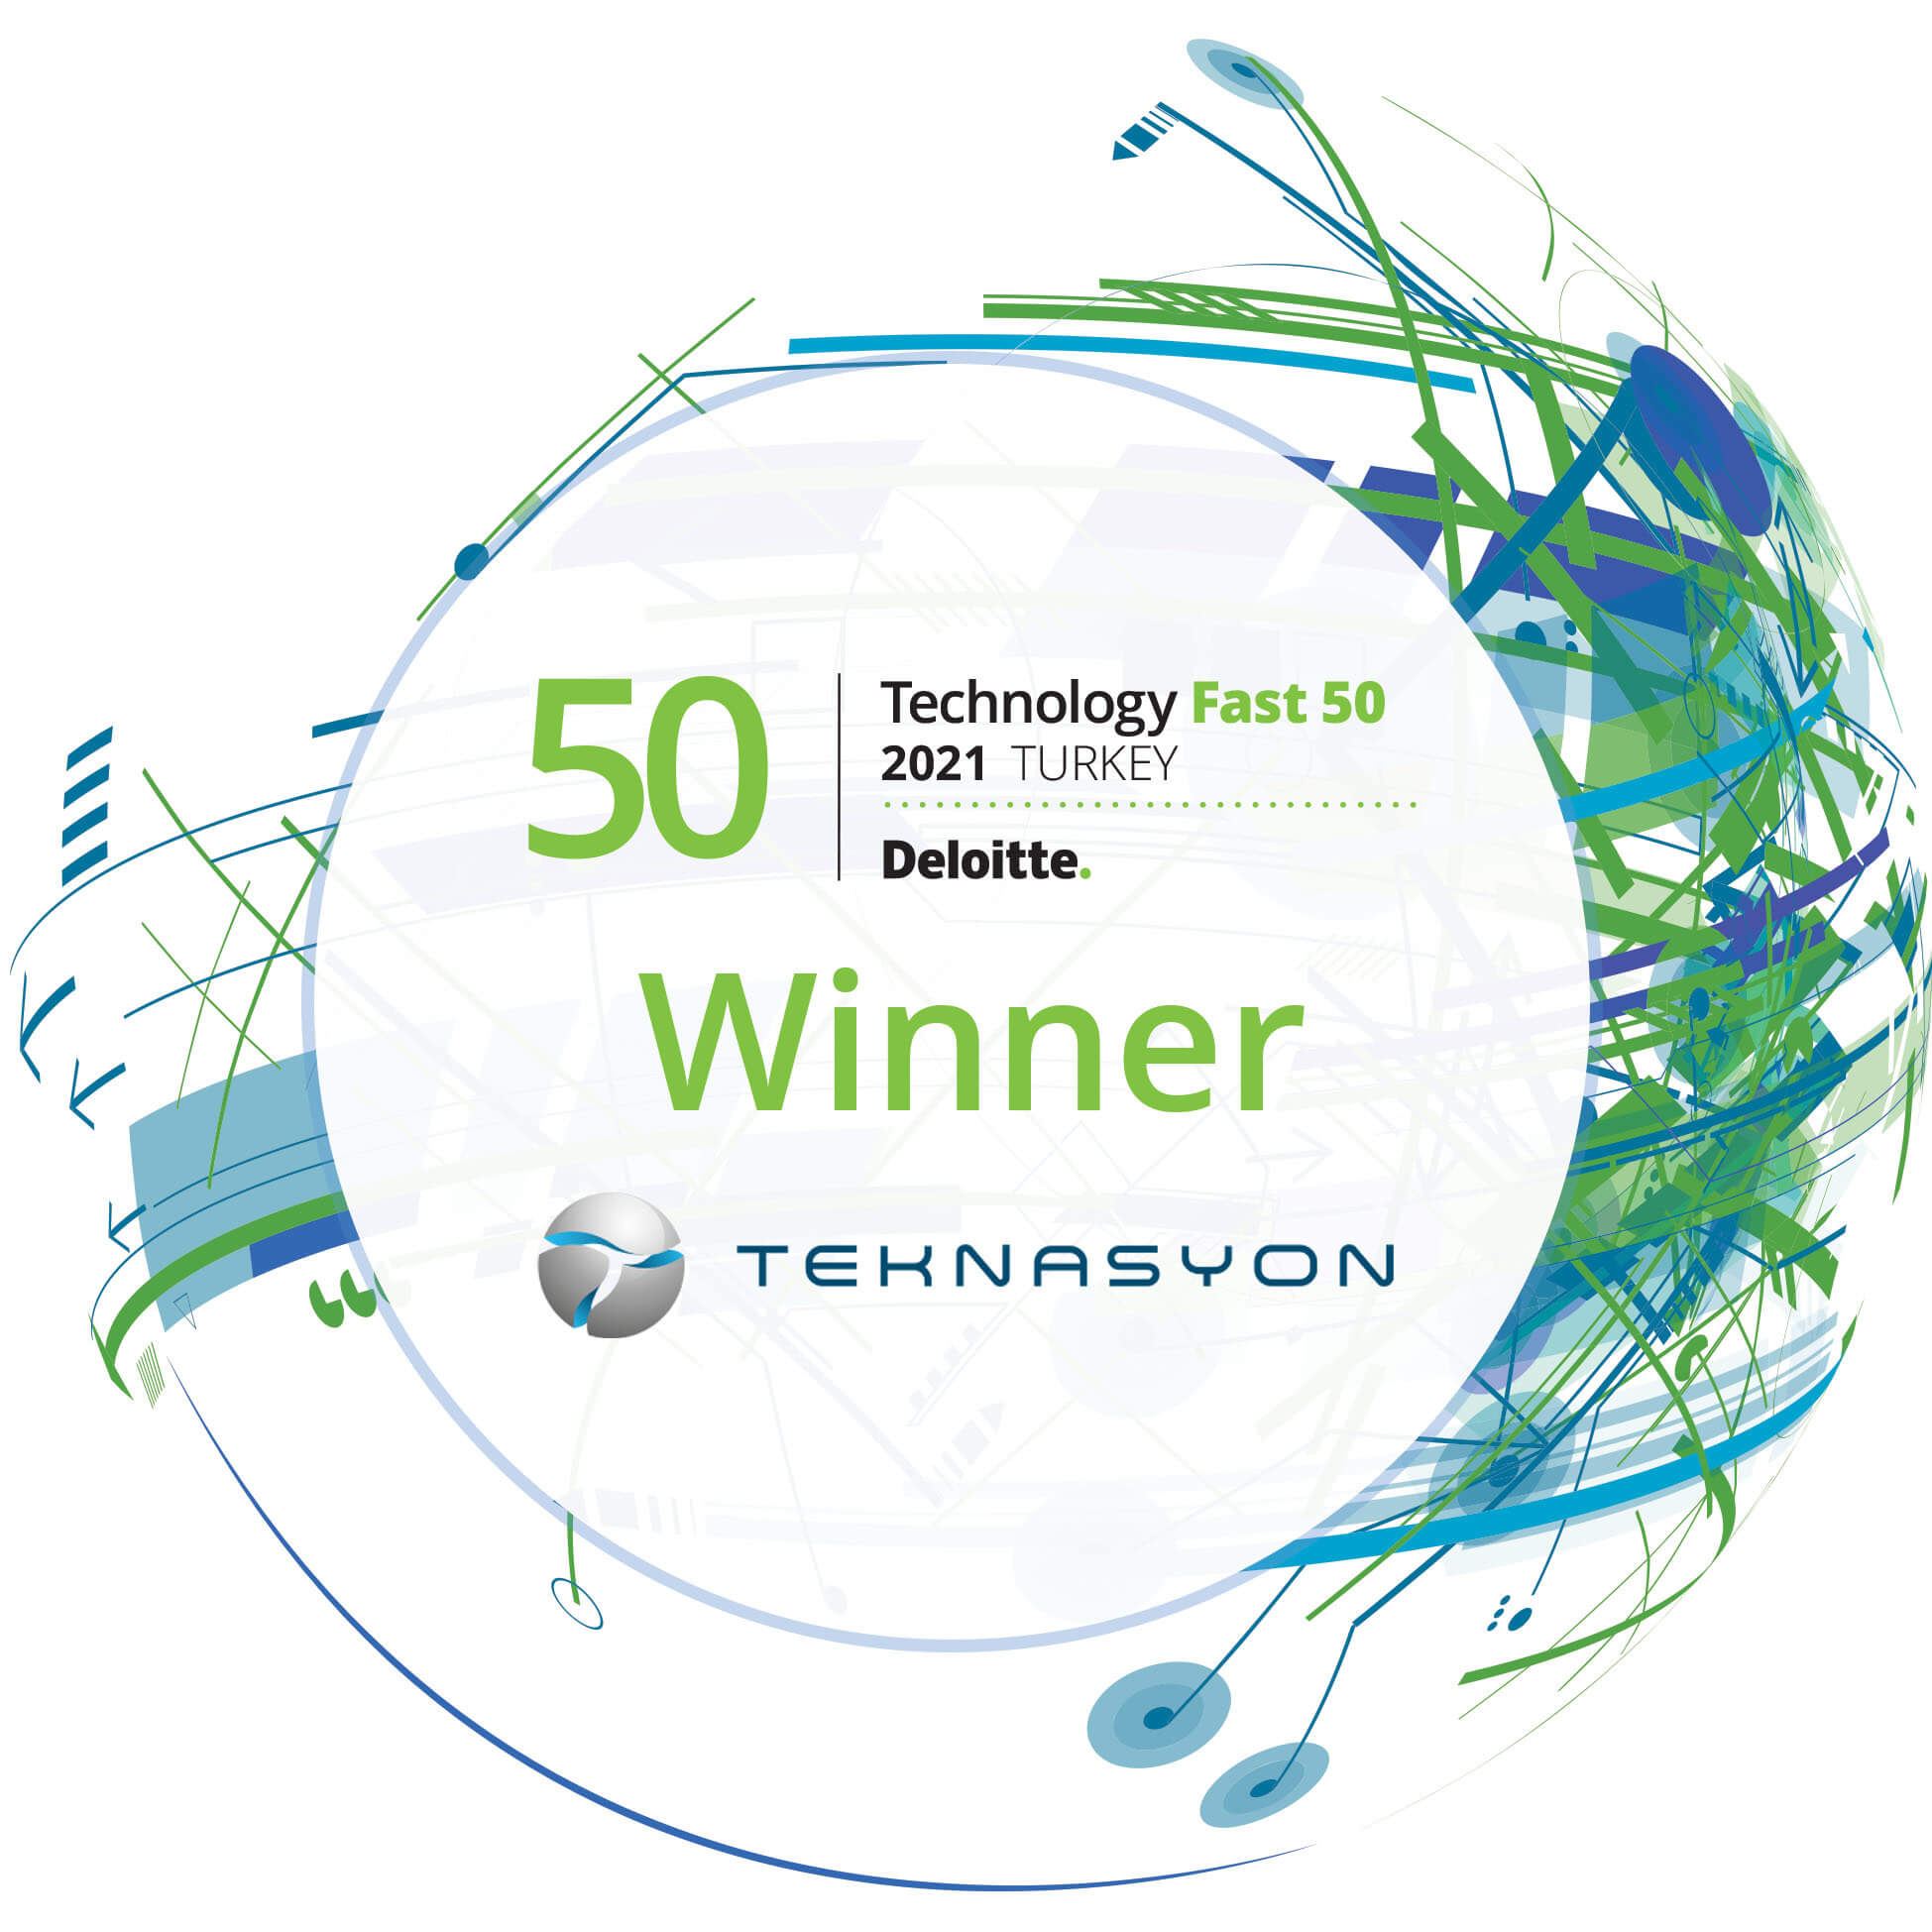 We are one of the top 50 rapidly growing tech companies in Turkey!